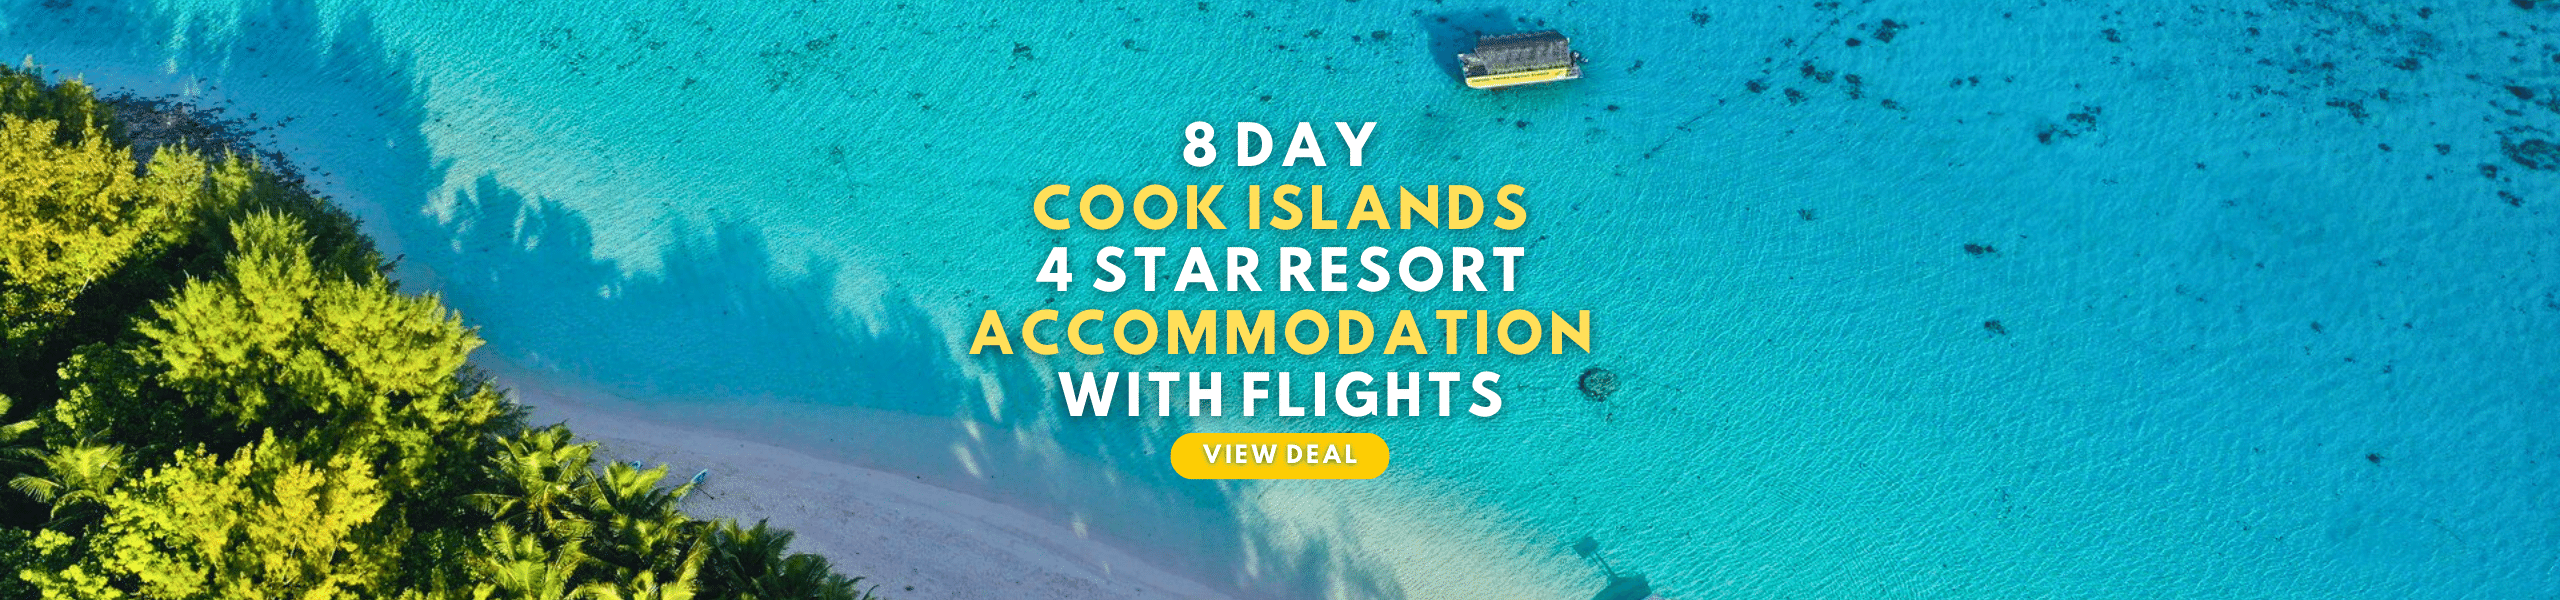 Package Tours To The Cook Islands From Australia 